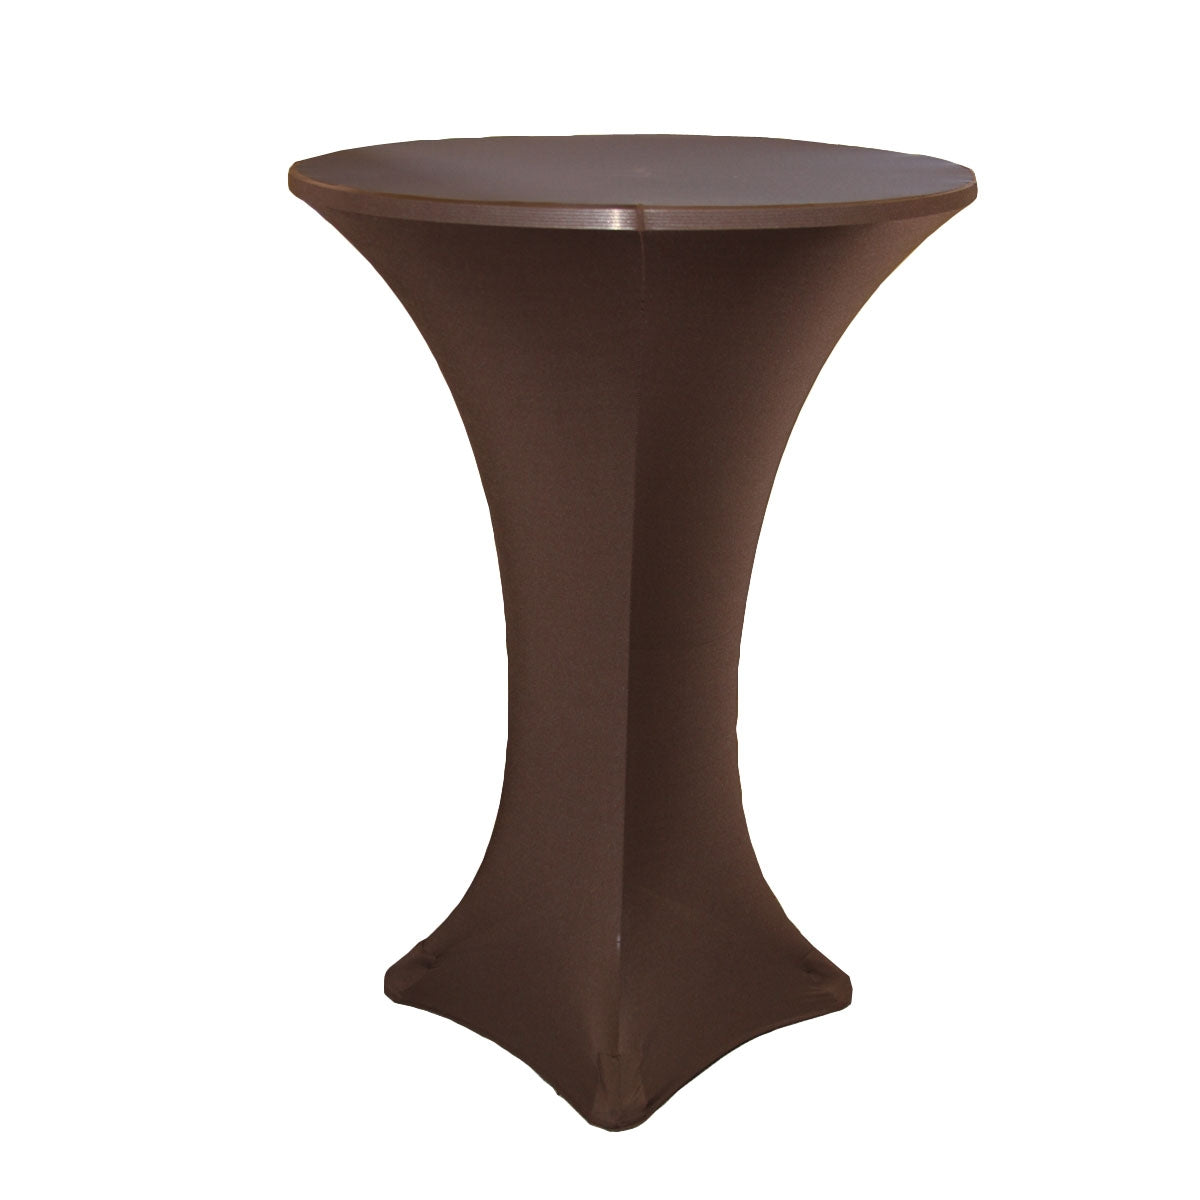 Spandex Cocktail Table Cover 30" Round - Chocolate Brown - CV Linens